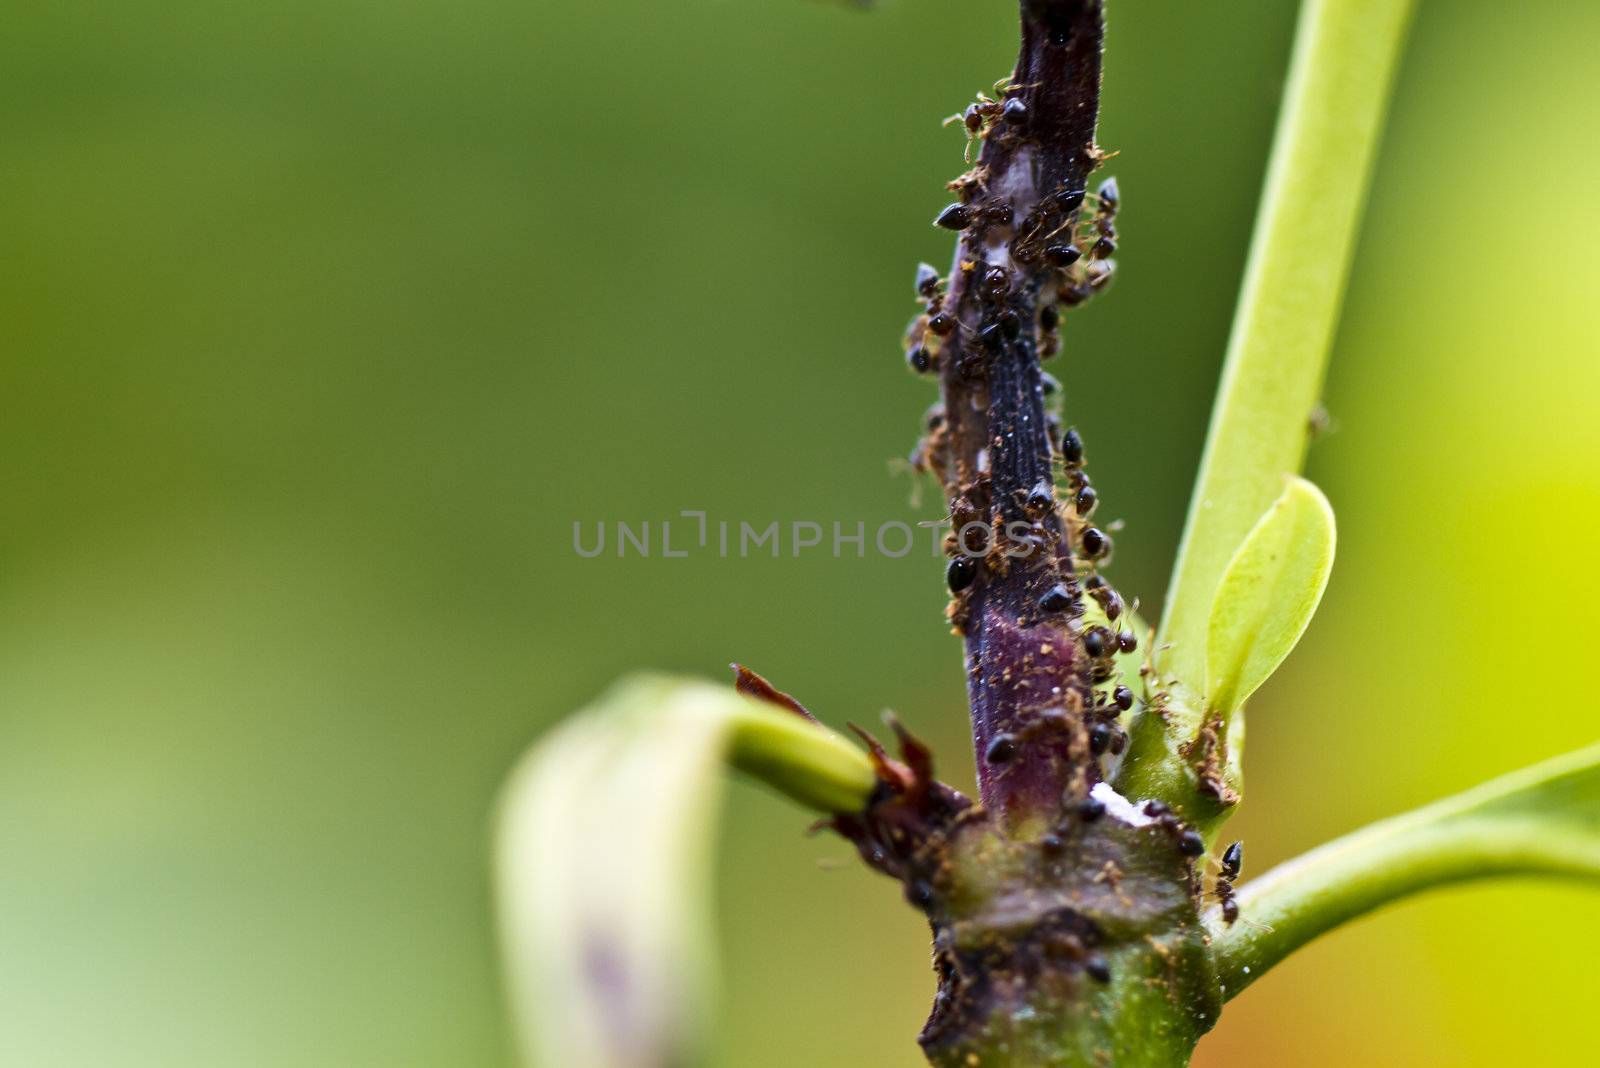 ants crawling on a dried plant shoot with green bokeh background